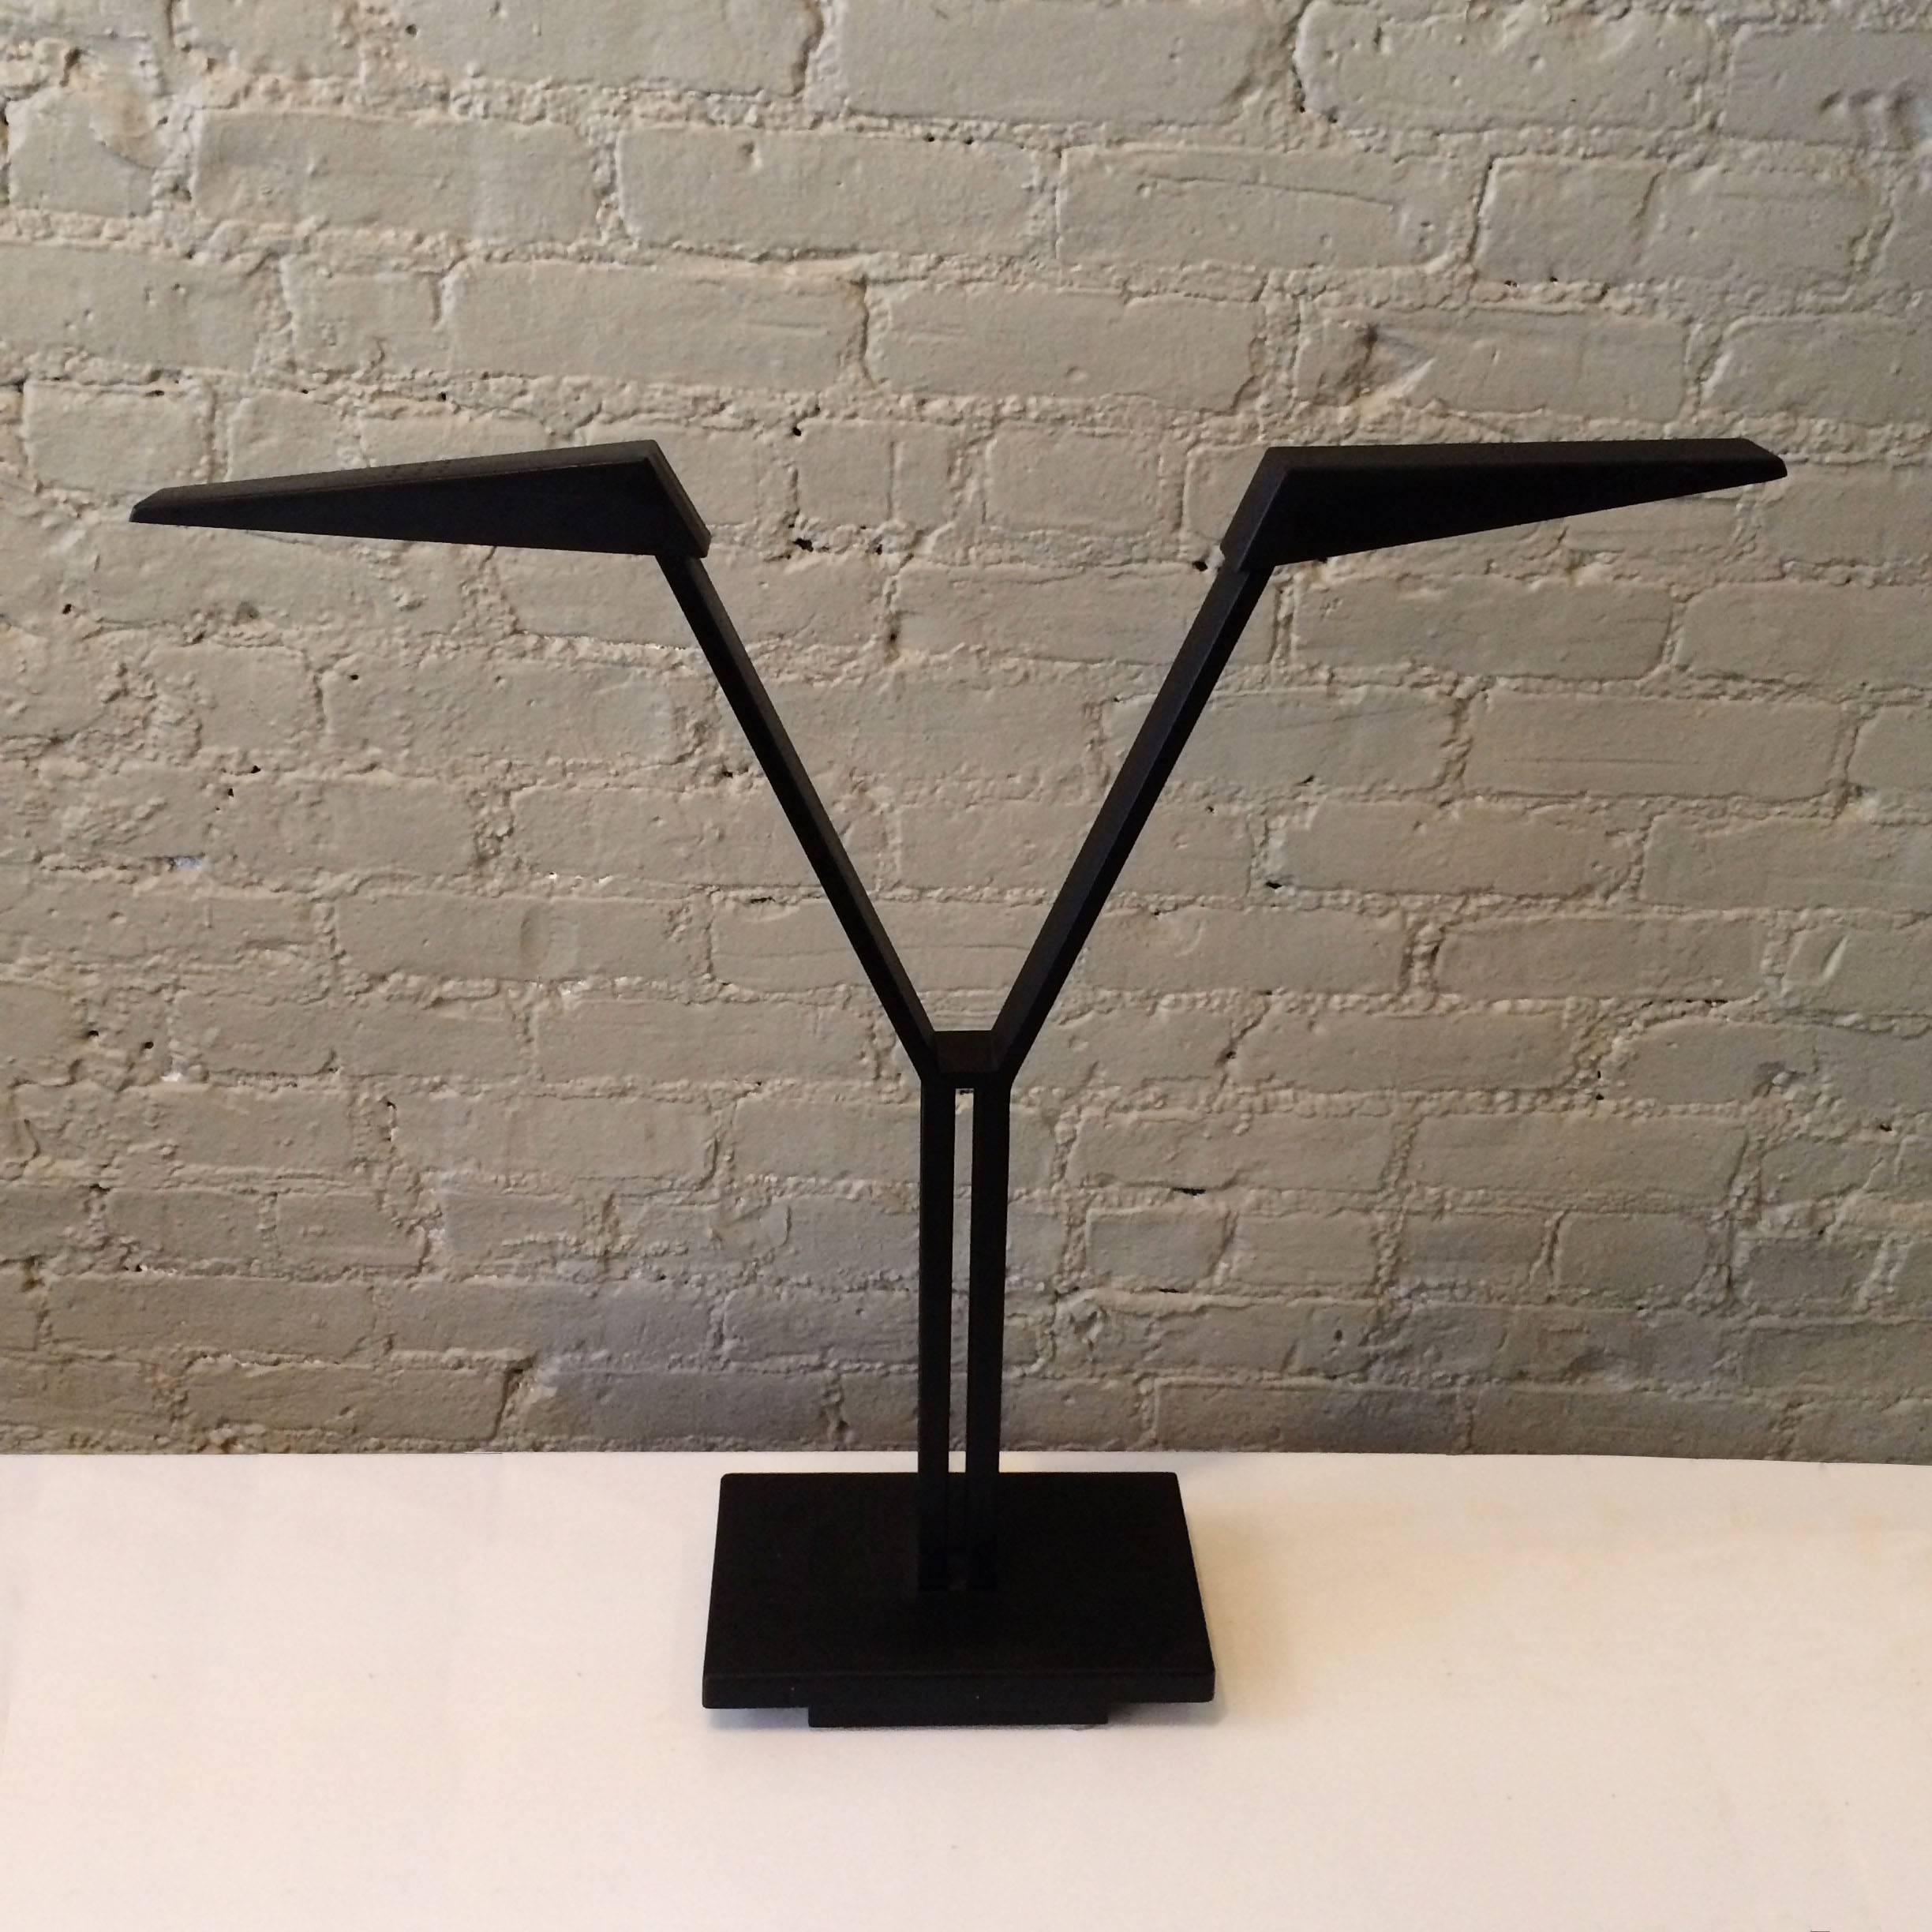 Impressive, Italian postmodern, black cast metal, double-headed, desk lamp by Roverto Maracatti for Zeus Milano features articulating heads that accept one Halogen bulb each.